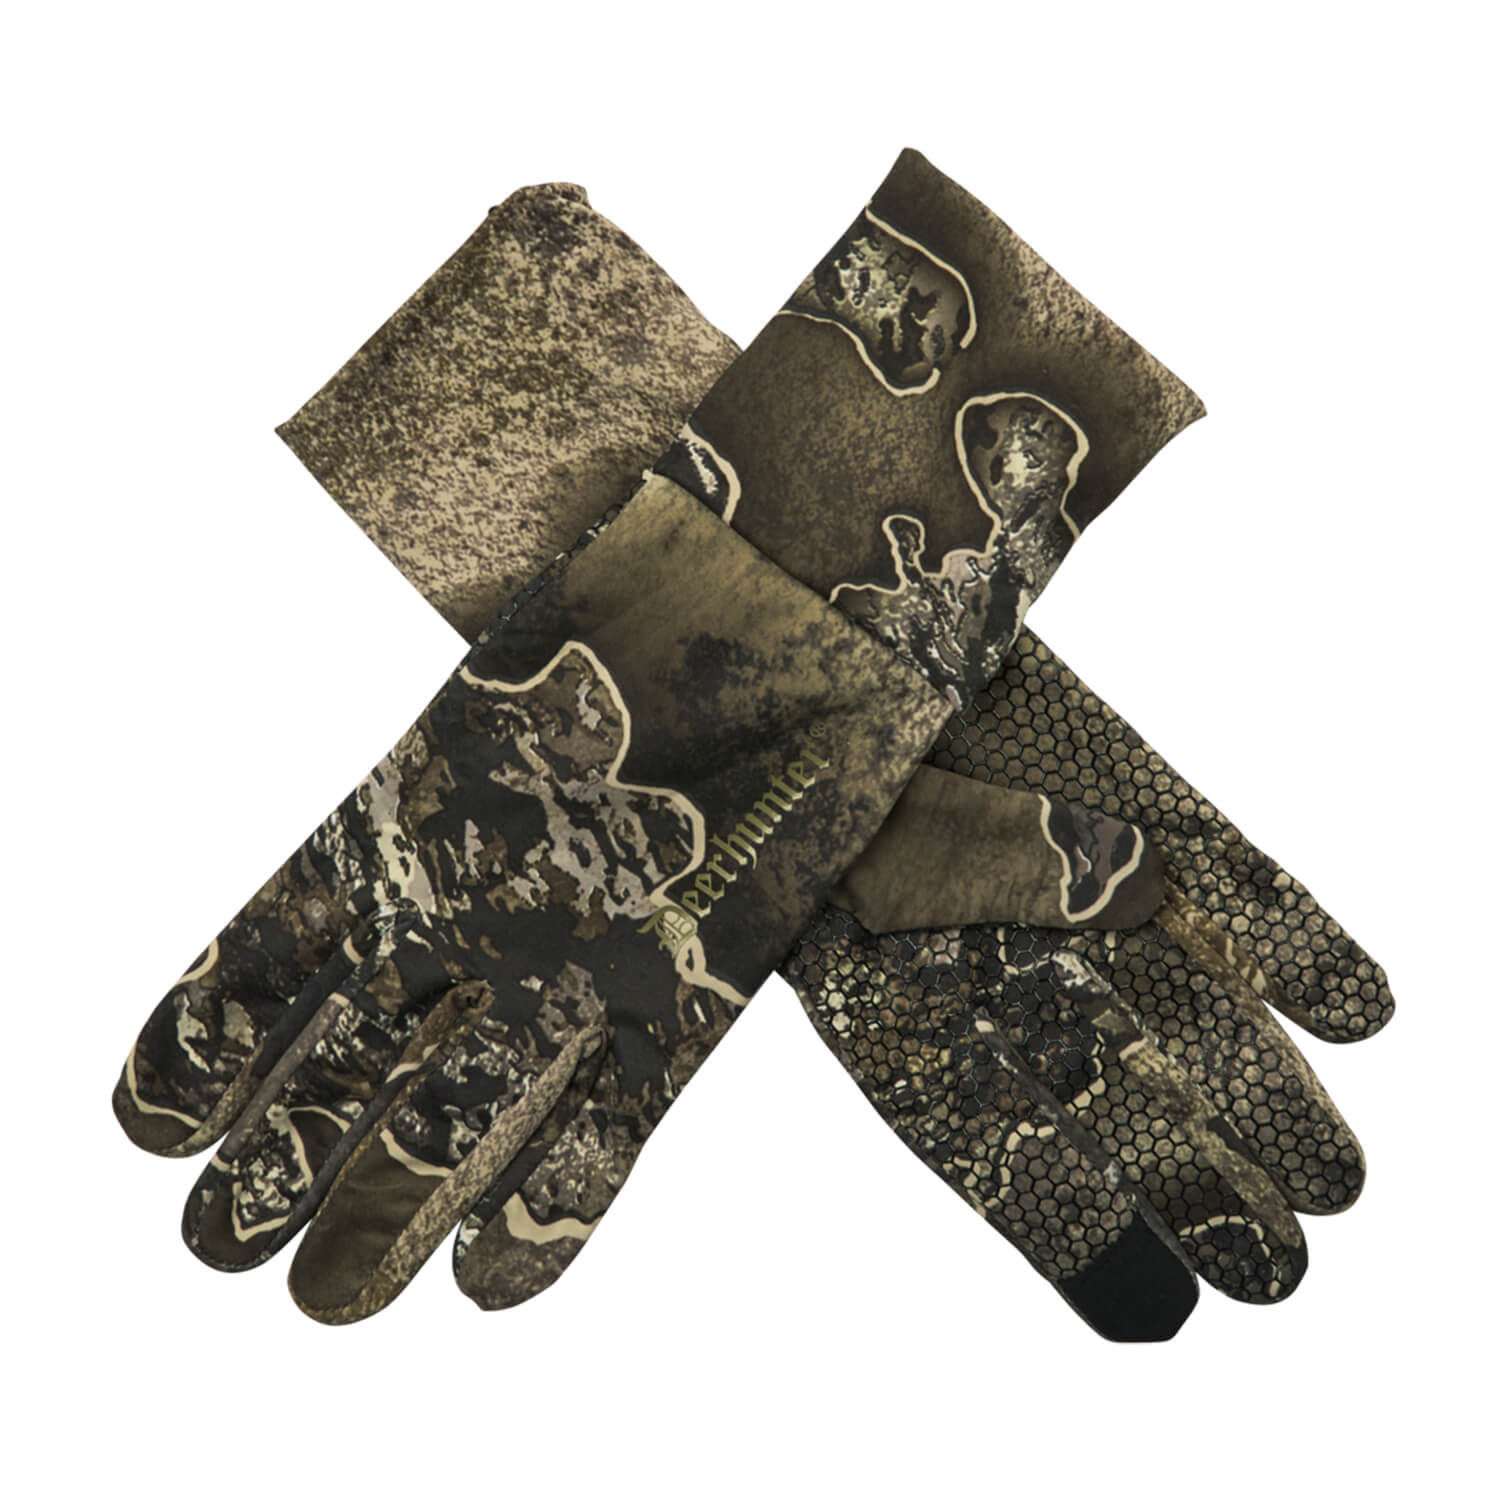 Deerhunte Gloves (Realtree Excape) - Camouflage Gloves